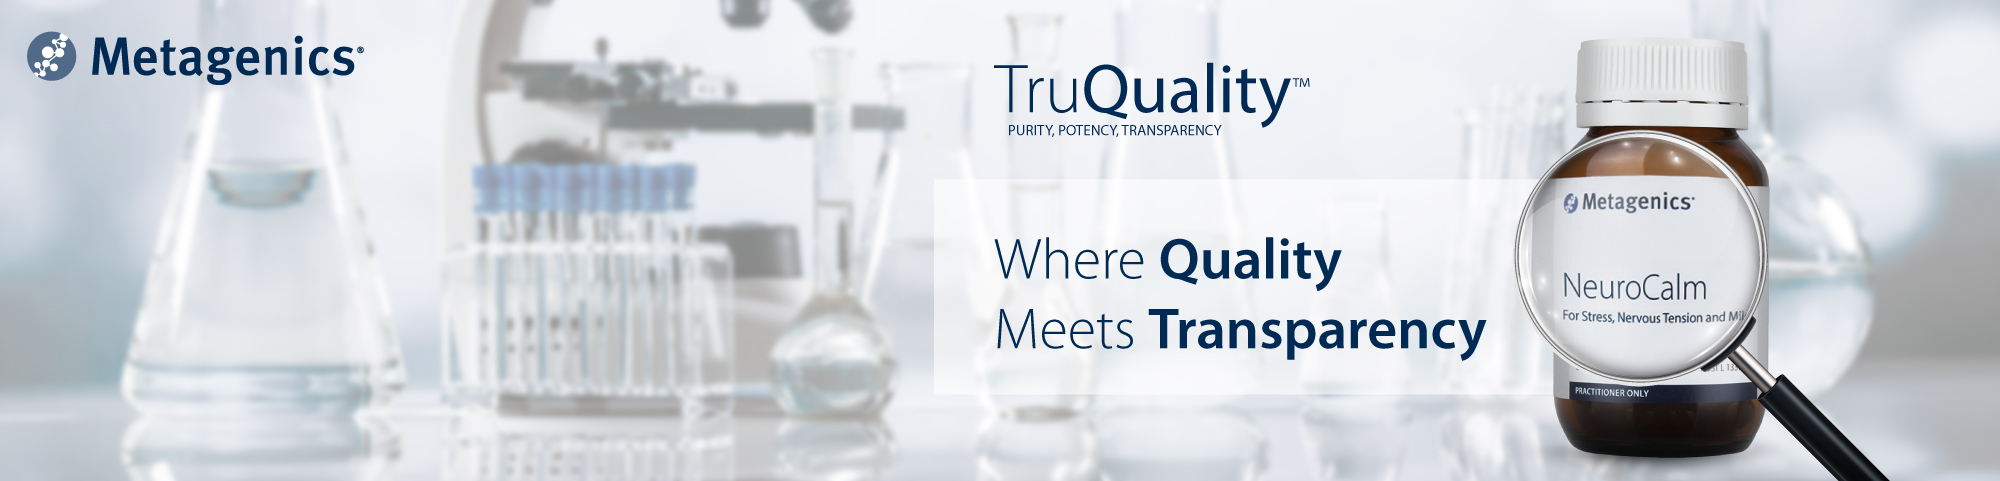 TruQuality Website Banner